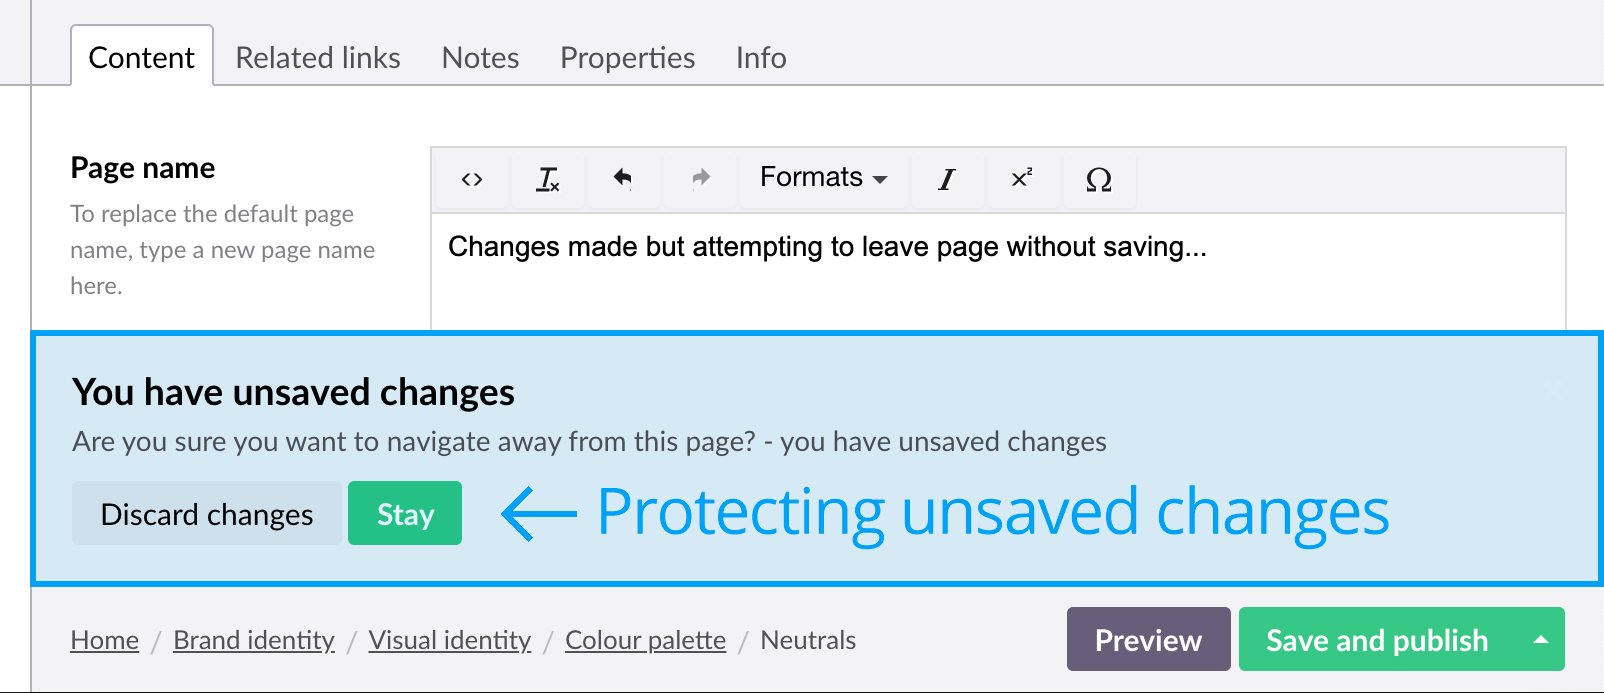 Protecting unsaved changes